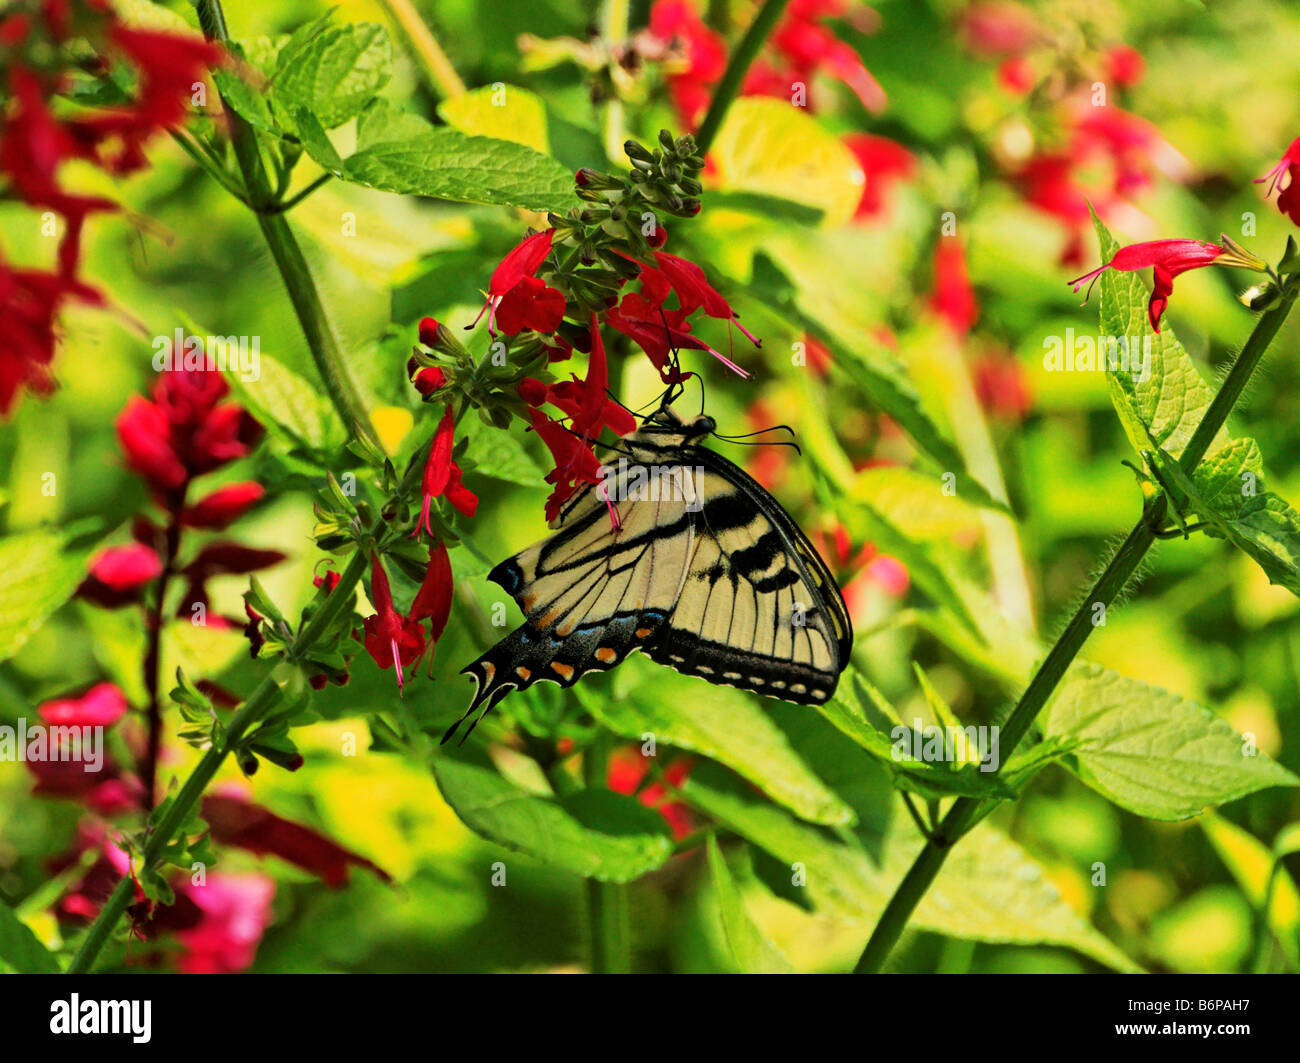 Eastern Tiger Swallowtail butterfly at Lady in Red Salvia flowers. Stock Photo